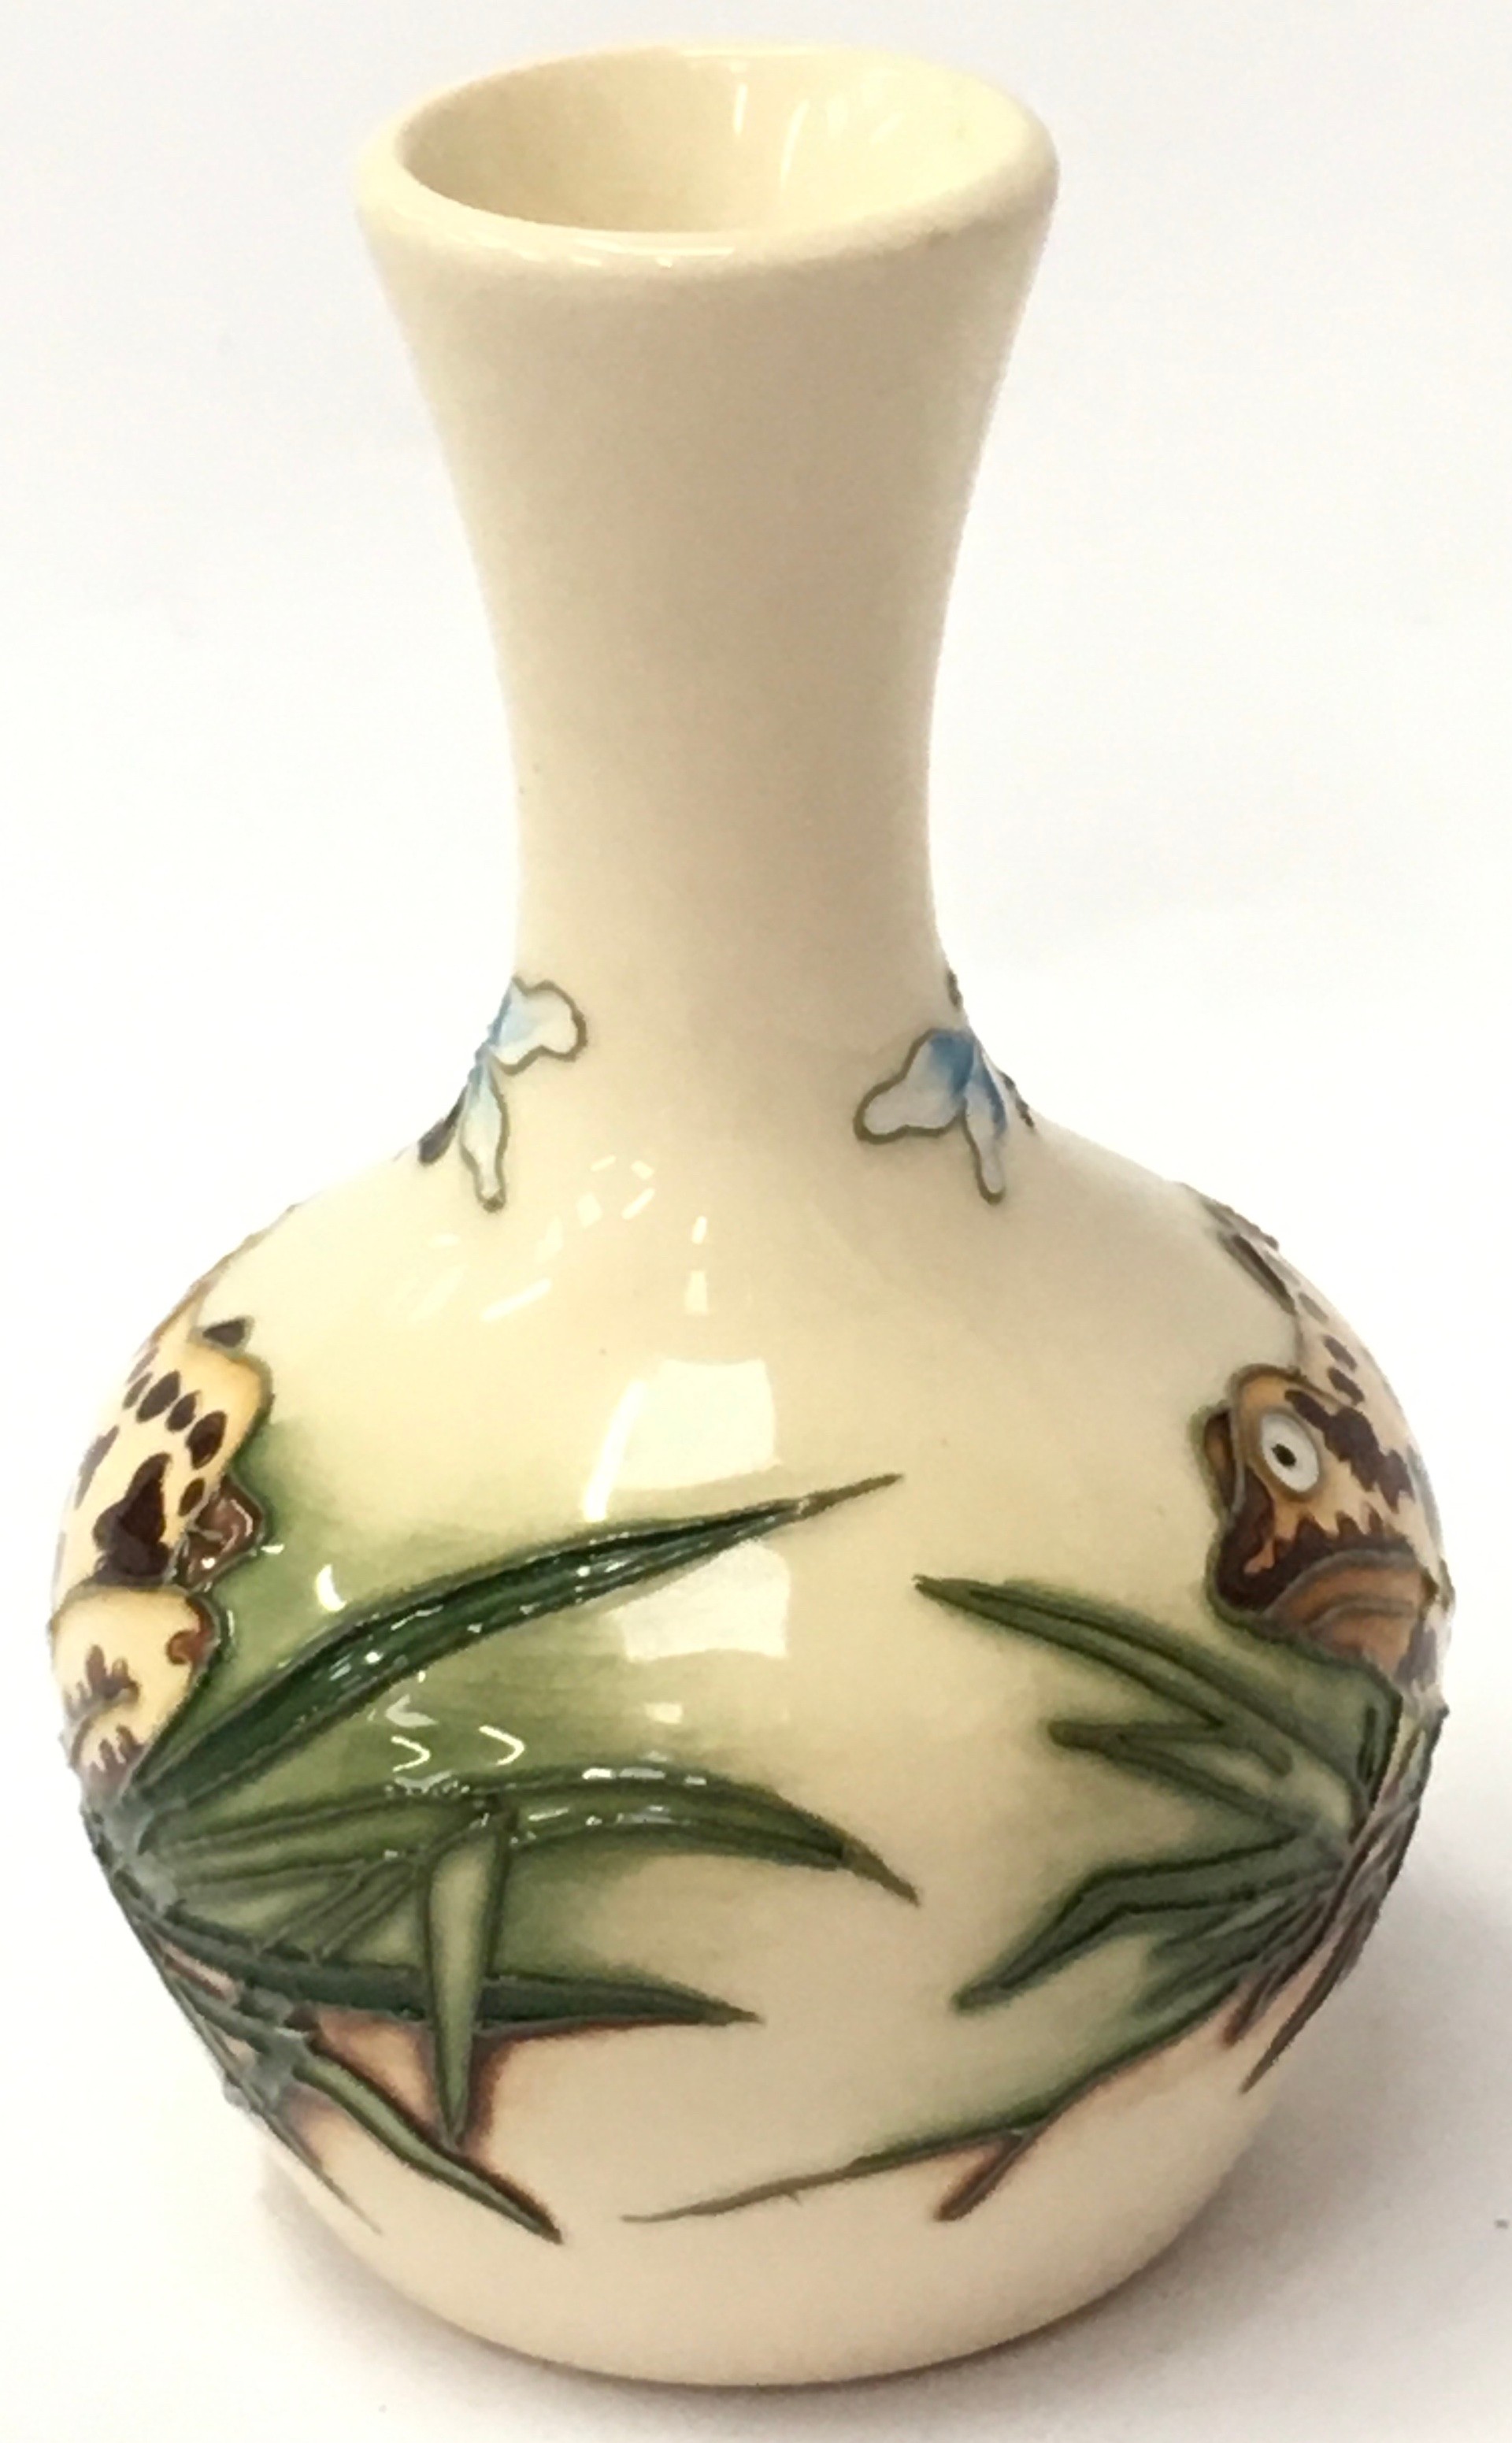 Moorcroft small vase depicting a frog 2009 fully marked & signed to base 4" high. - Image 3 of 5